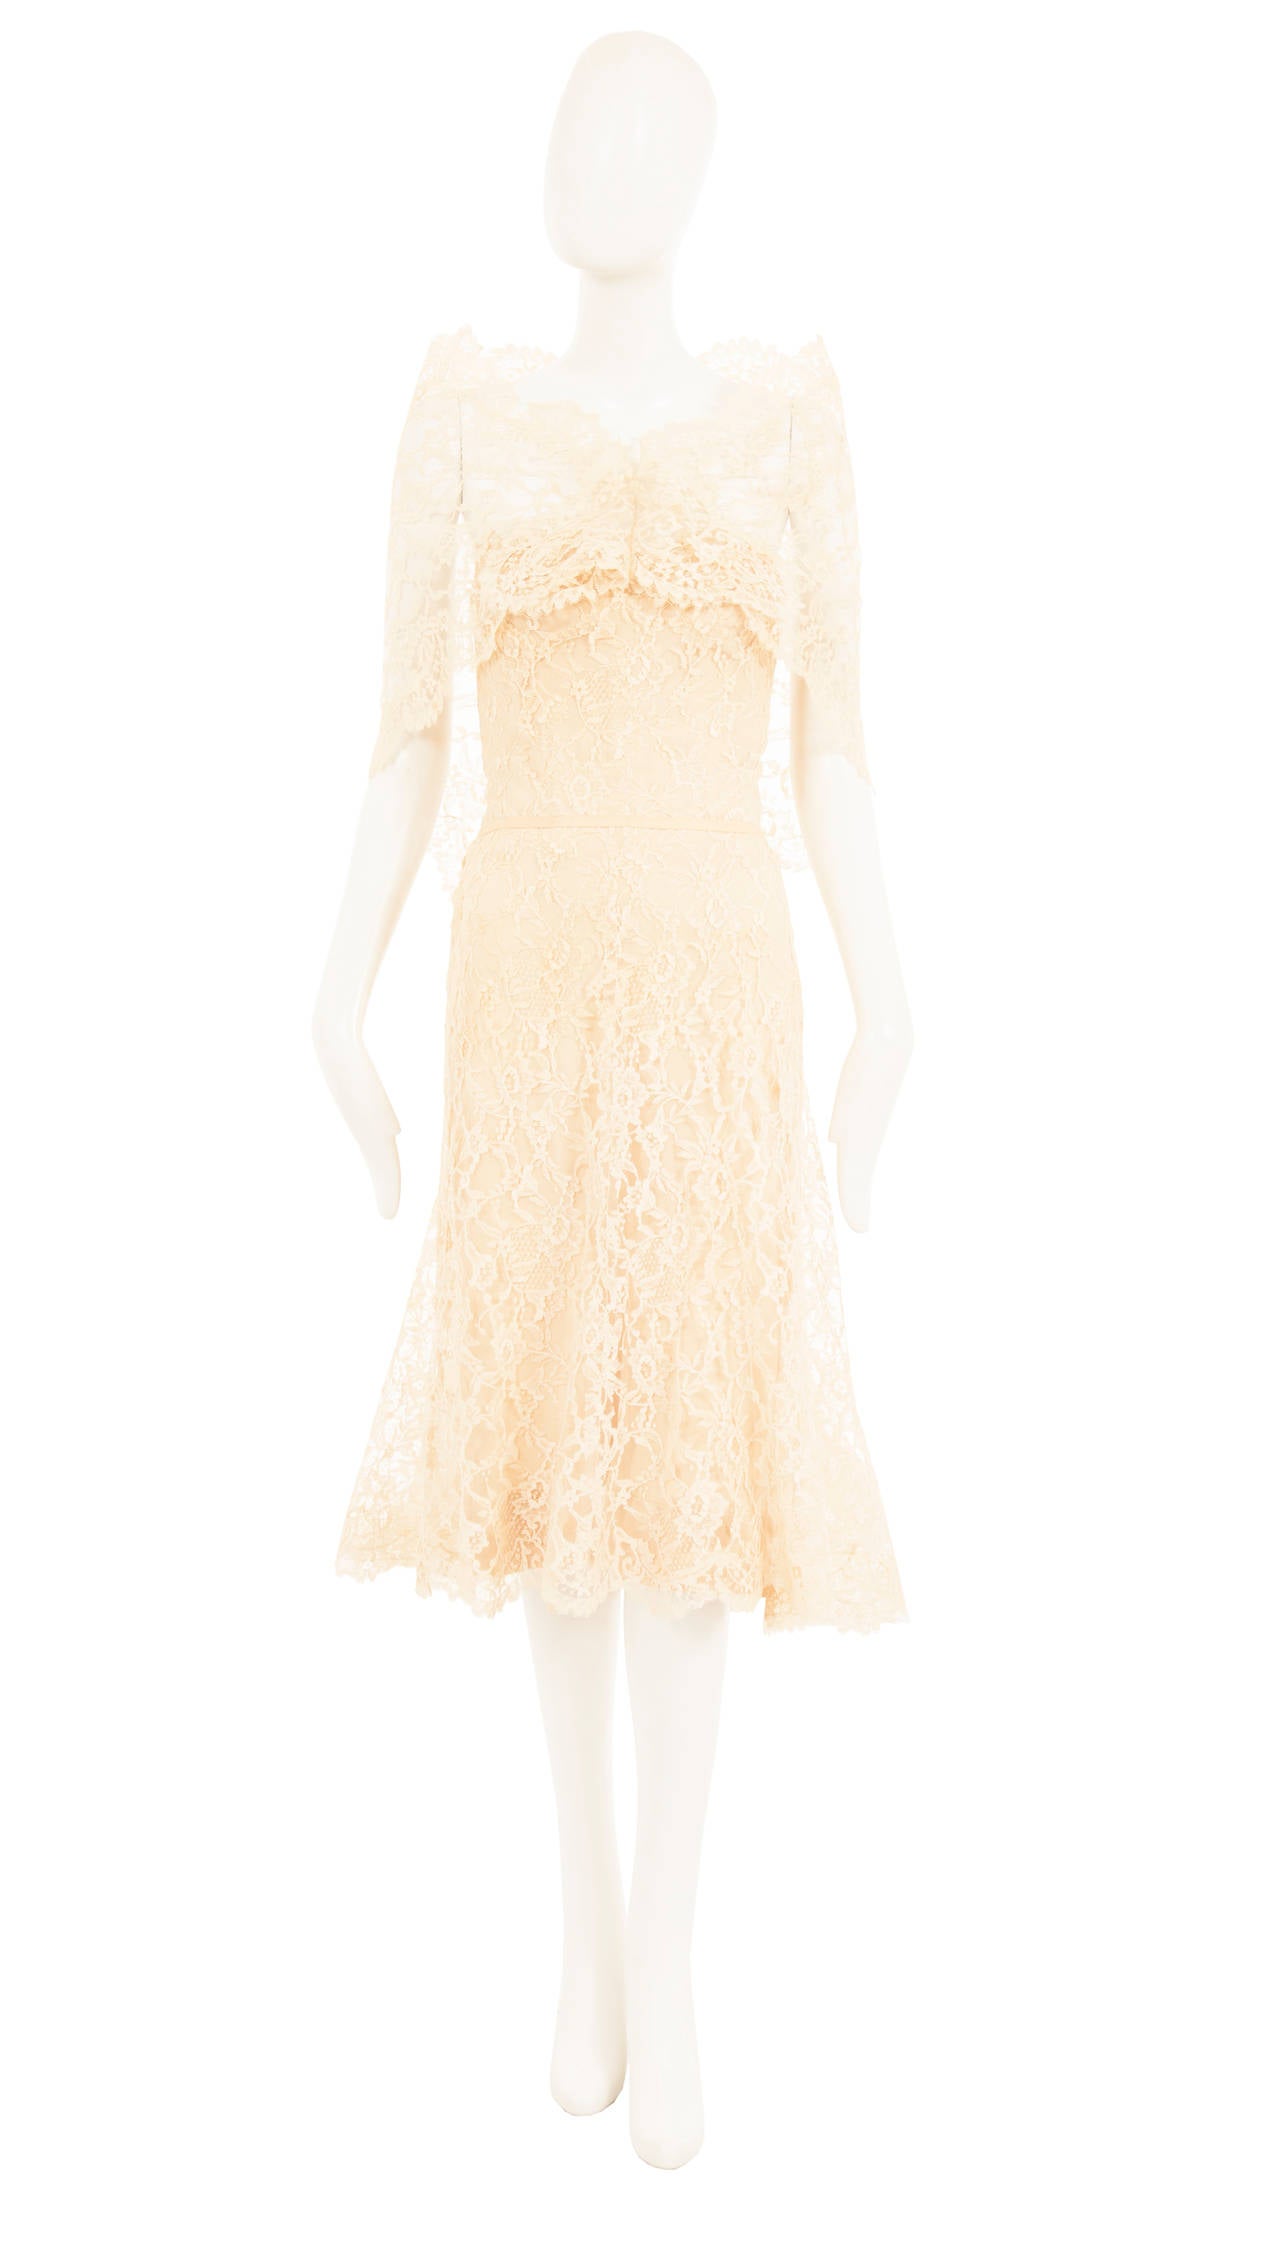 An exquisite piece of haute couture, this Chanel strapless cocktail dress is constructed of ivory Chantilly lace, fully lined in nude silk. The internal boned corset gives additional support, while a length of grosgrain ribbon runs around the